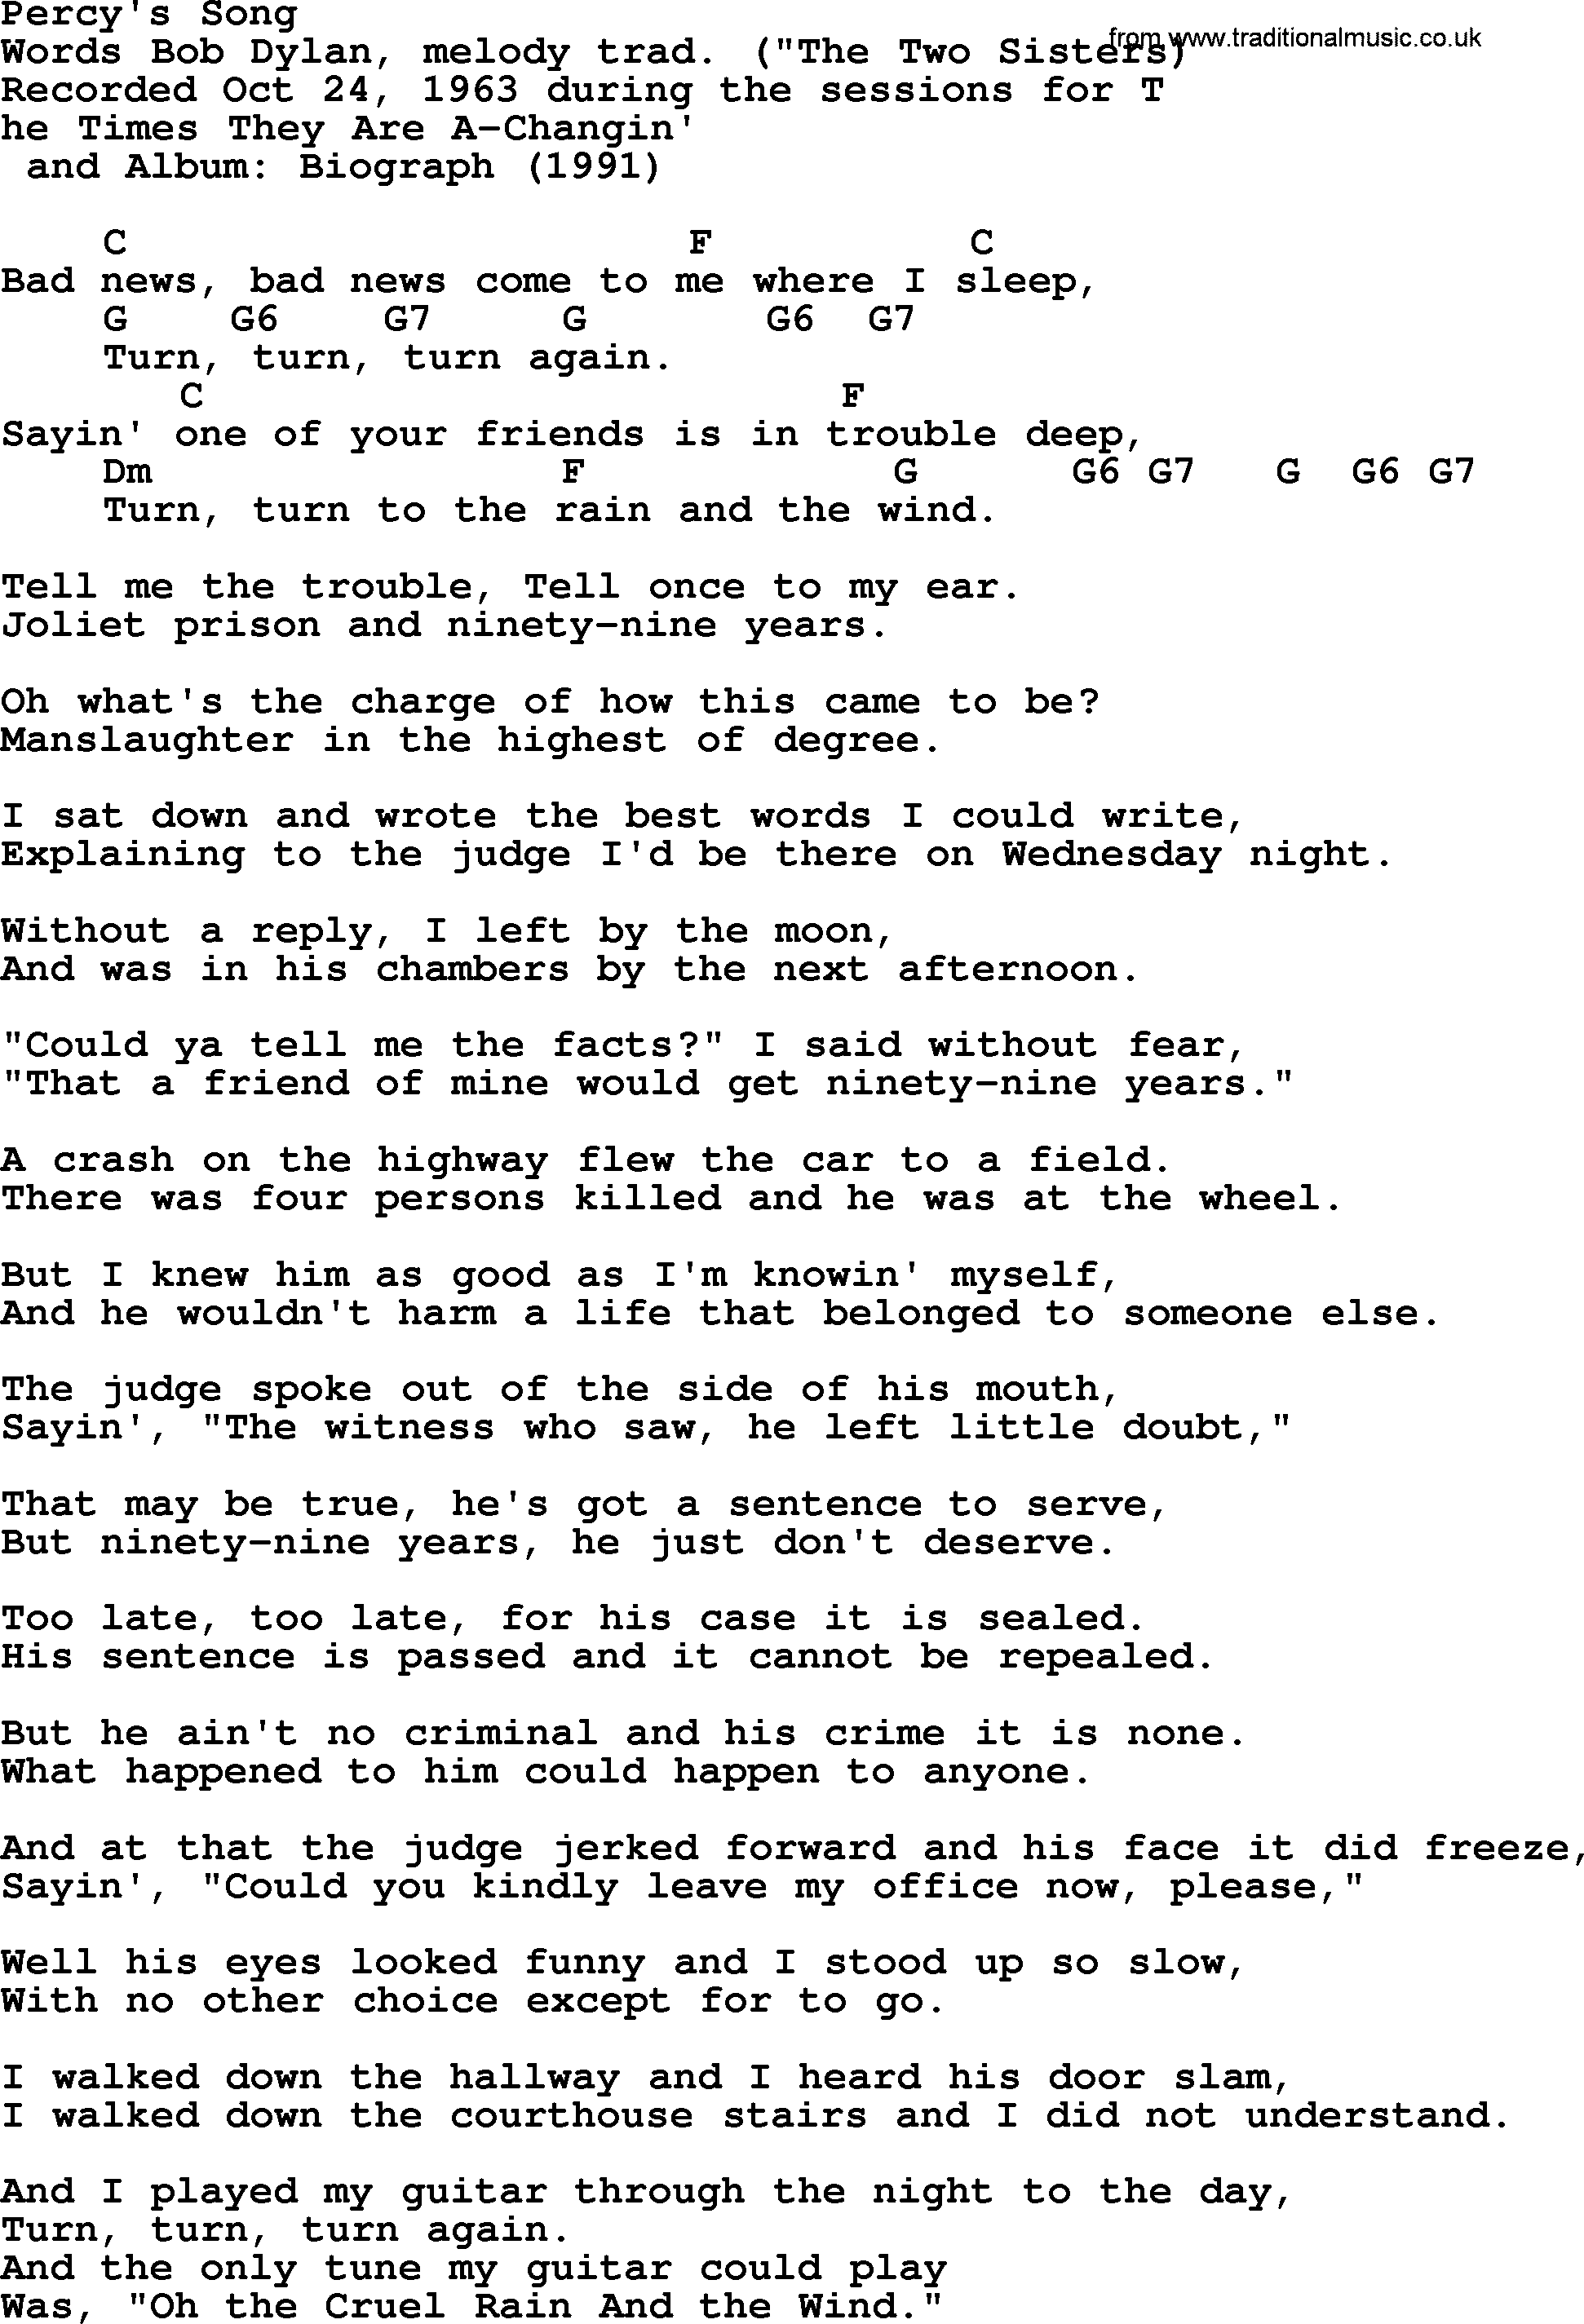 Bob Dylan song, lyrics with chords - Percy's Song